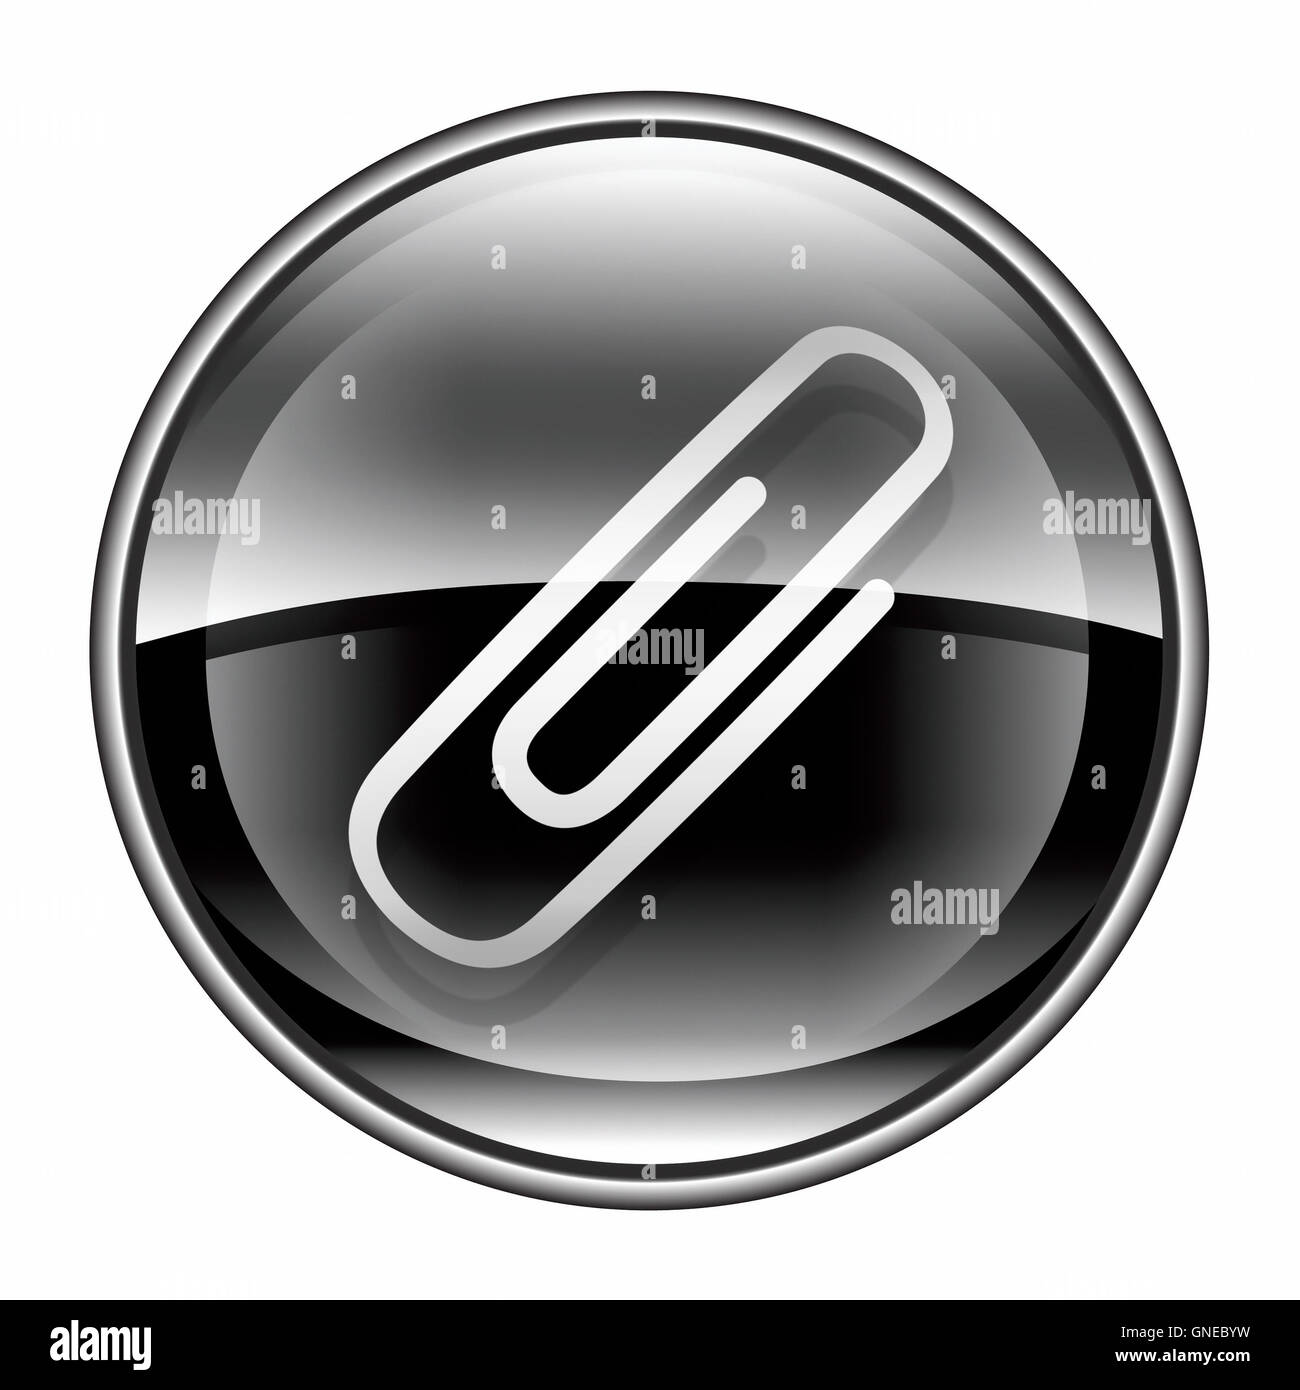 Paper clip icon black, isolated on white background Stock Photo